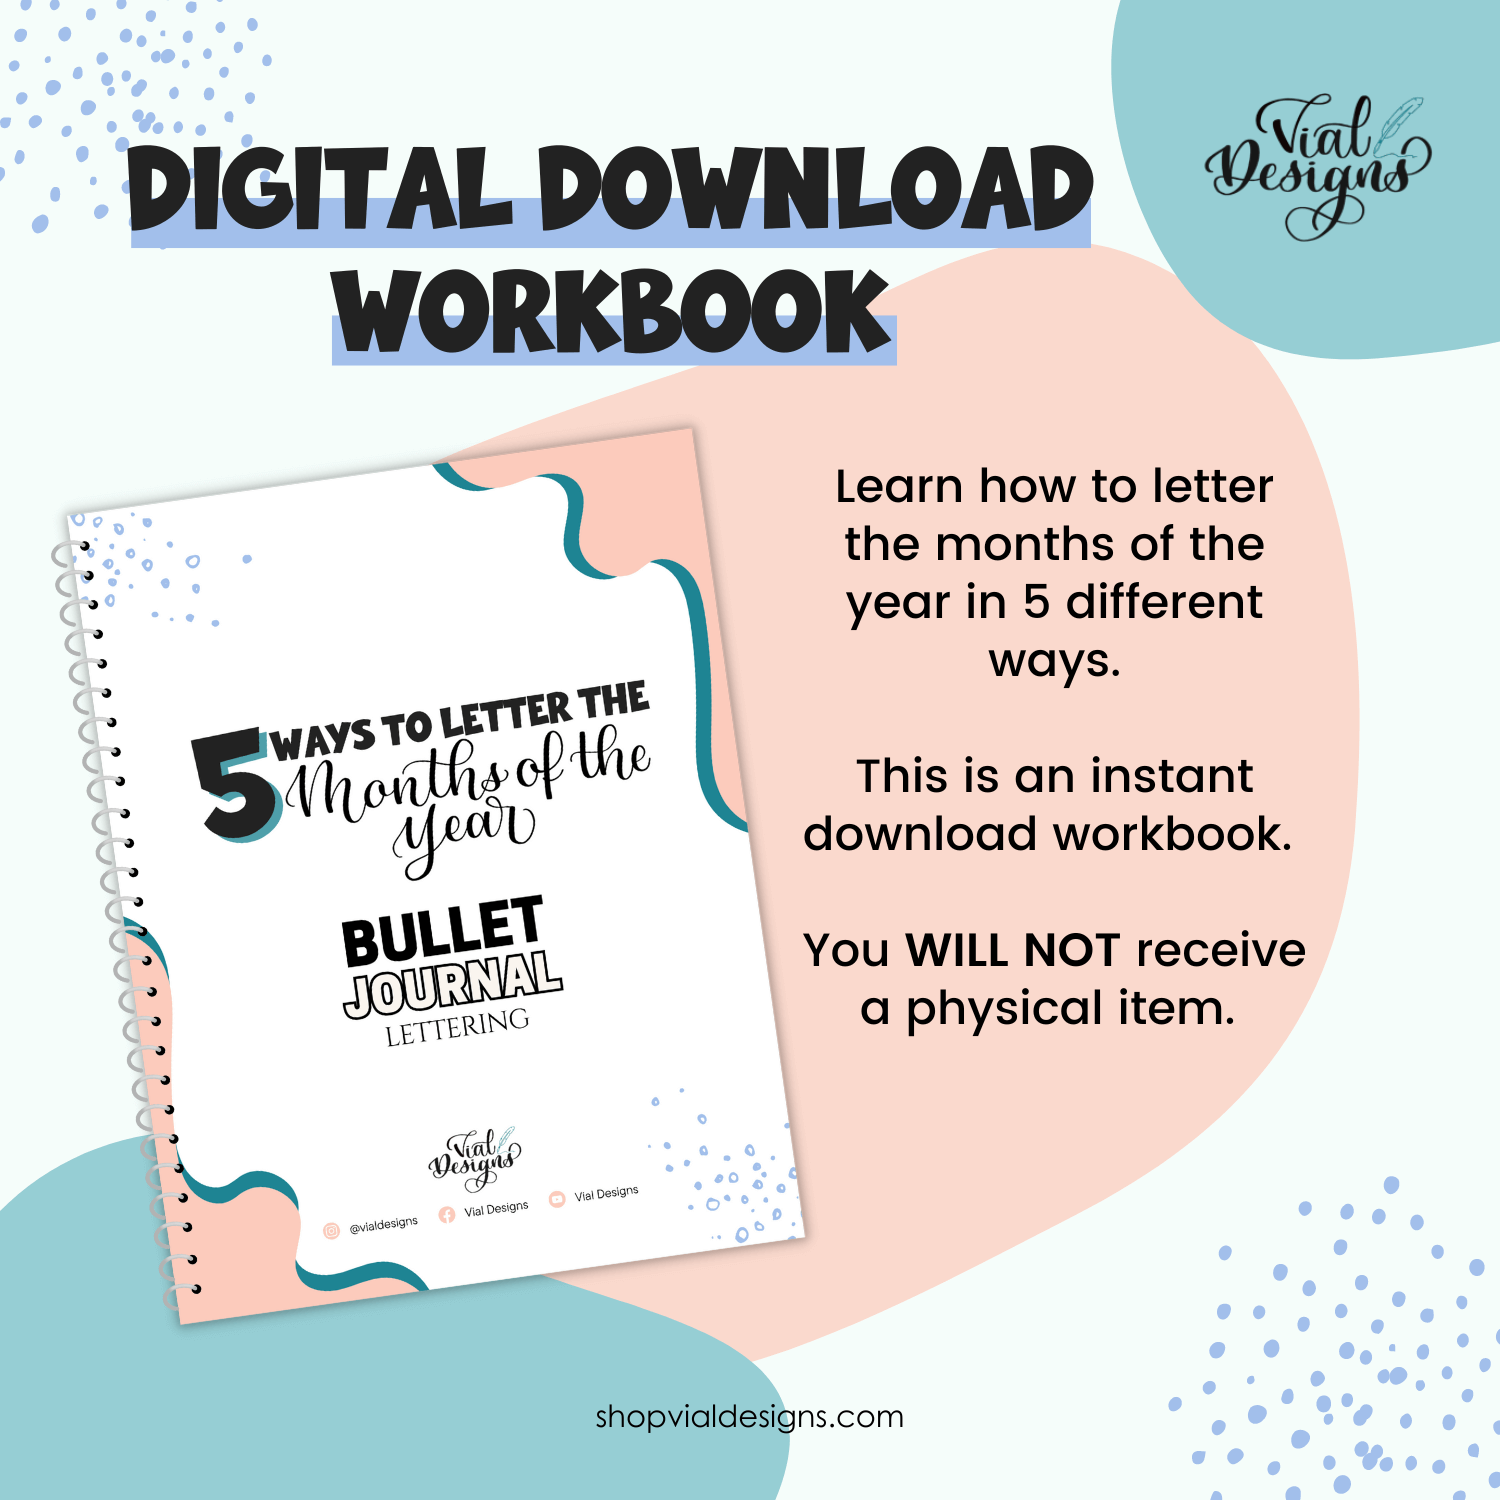 5 ways to letter the months of the year digital download workbook